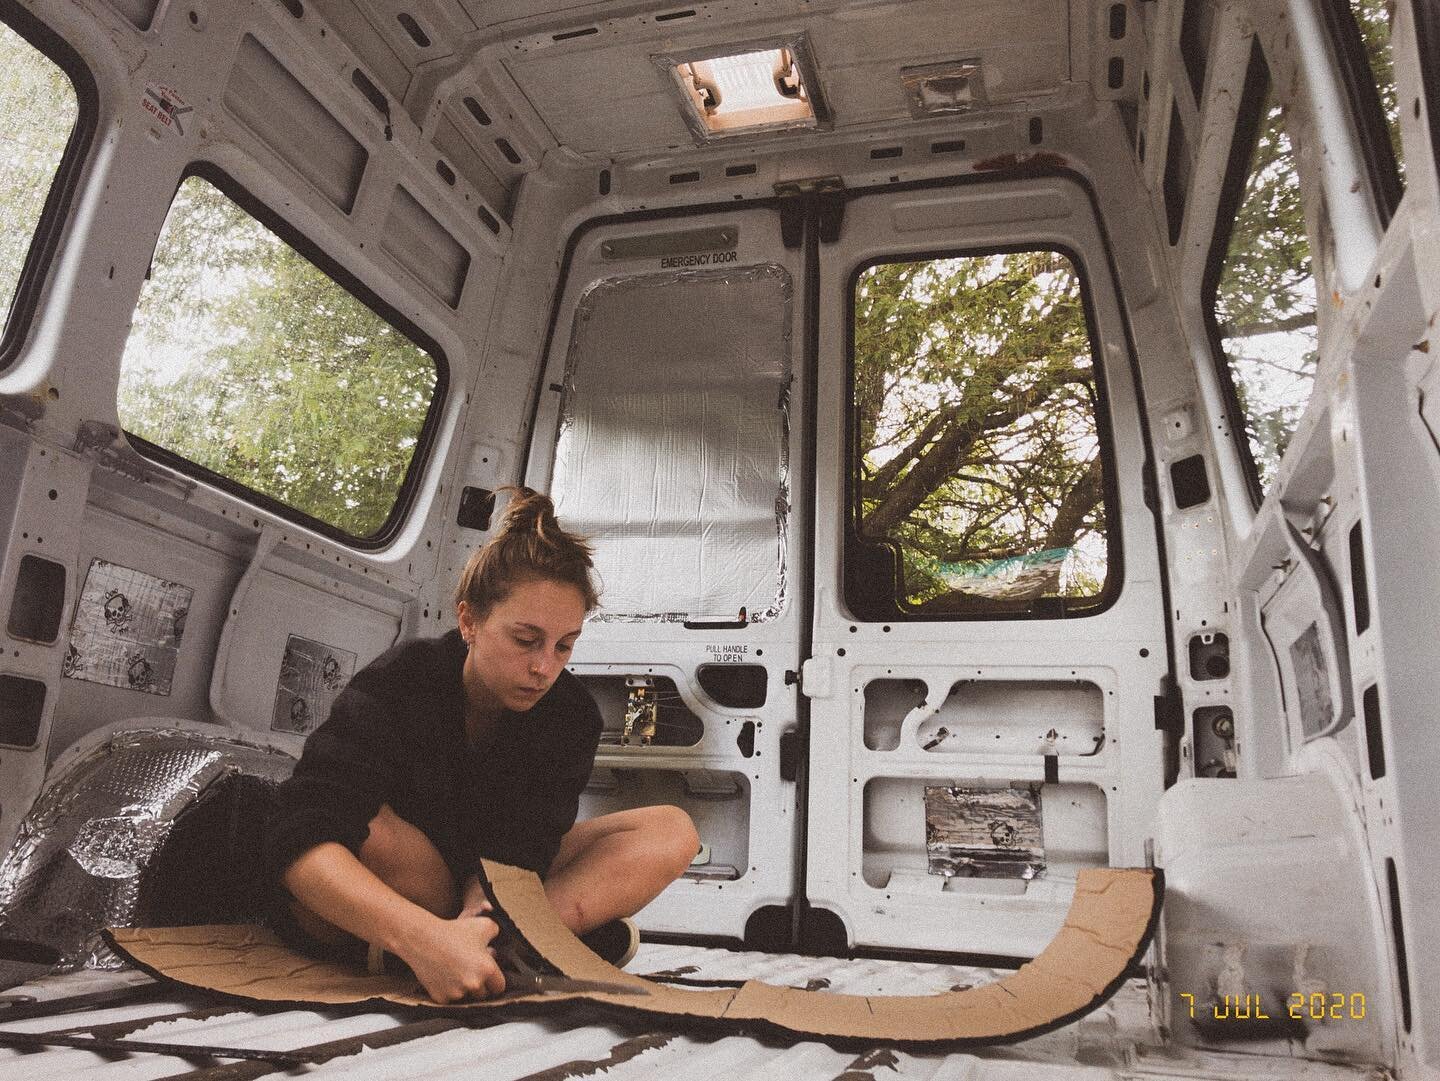 Cutting all our closed cell foam insulation to fit on the roof and around our vents! 

This stuff has been so great to work with, easy to cut with heavy duty scissors ✂️ and self adhesive so perfect for sticking across the roof 🚐

#vanbuild #vanconv